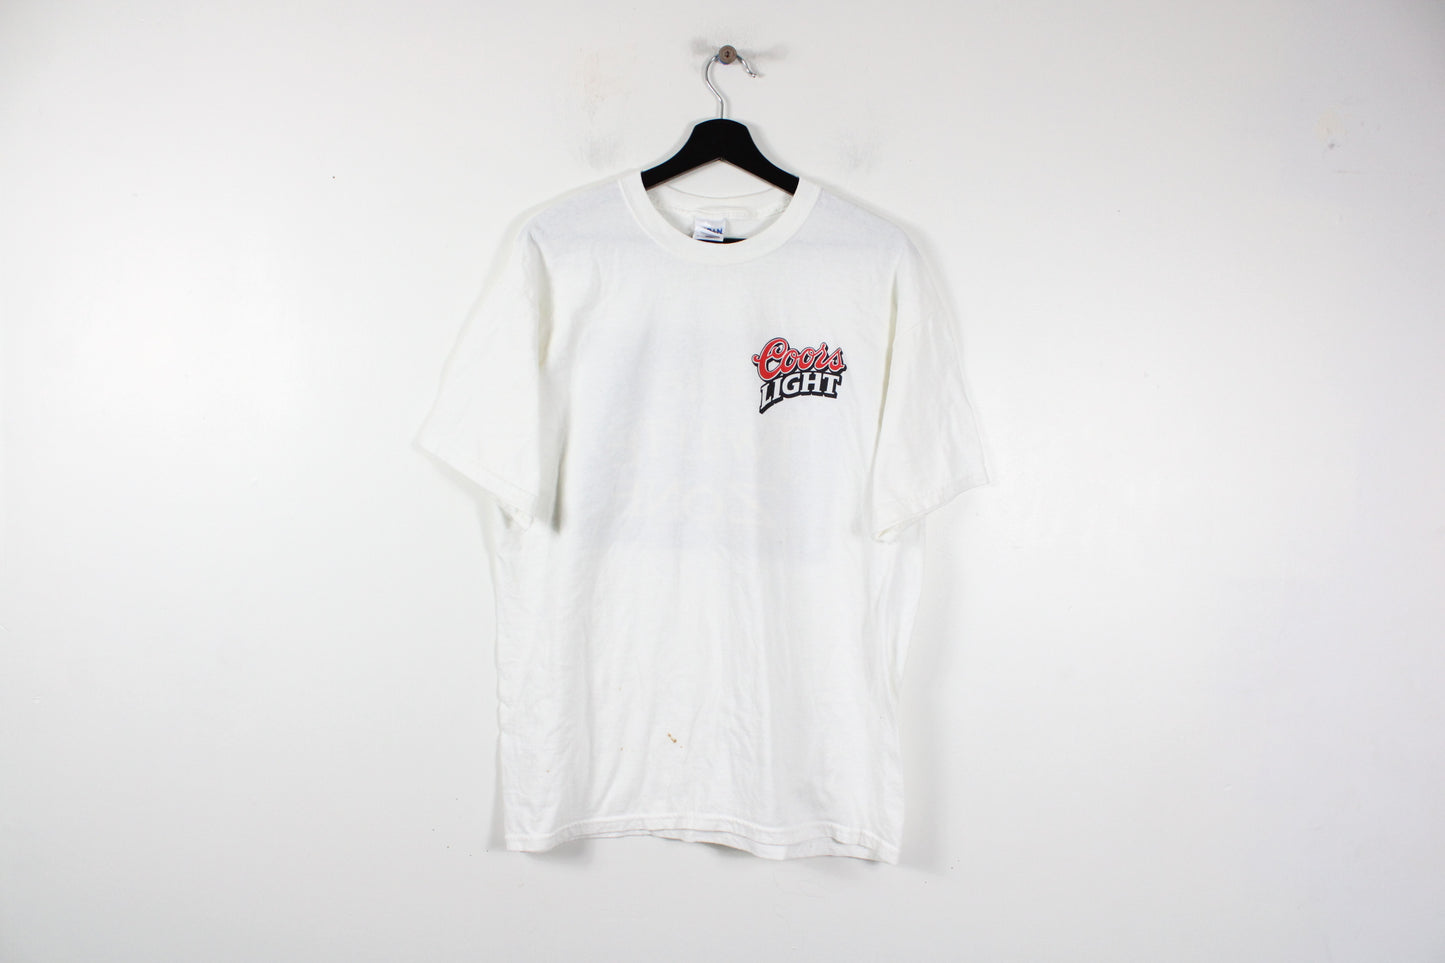 Coors Light "The Twilite Zone" T-Shirt